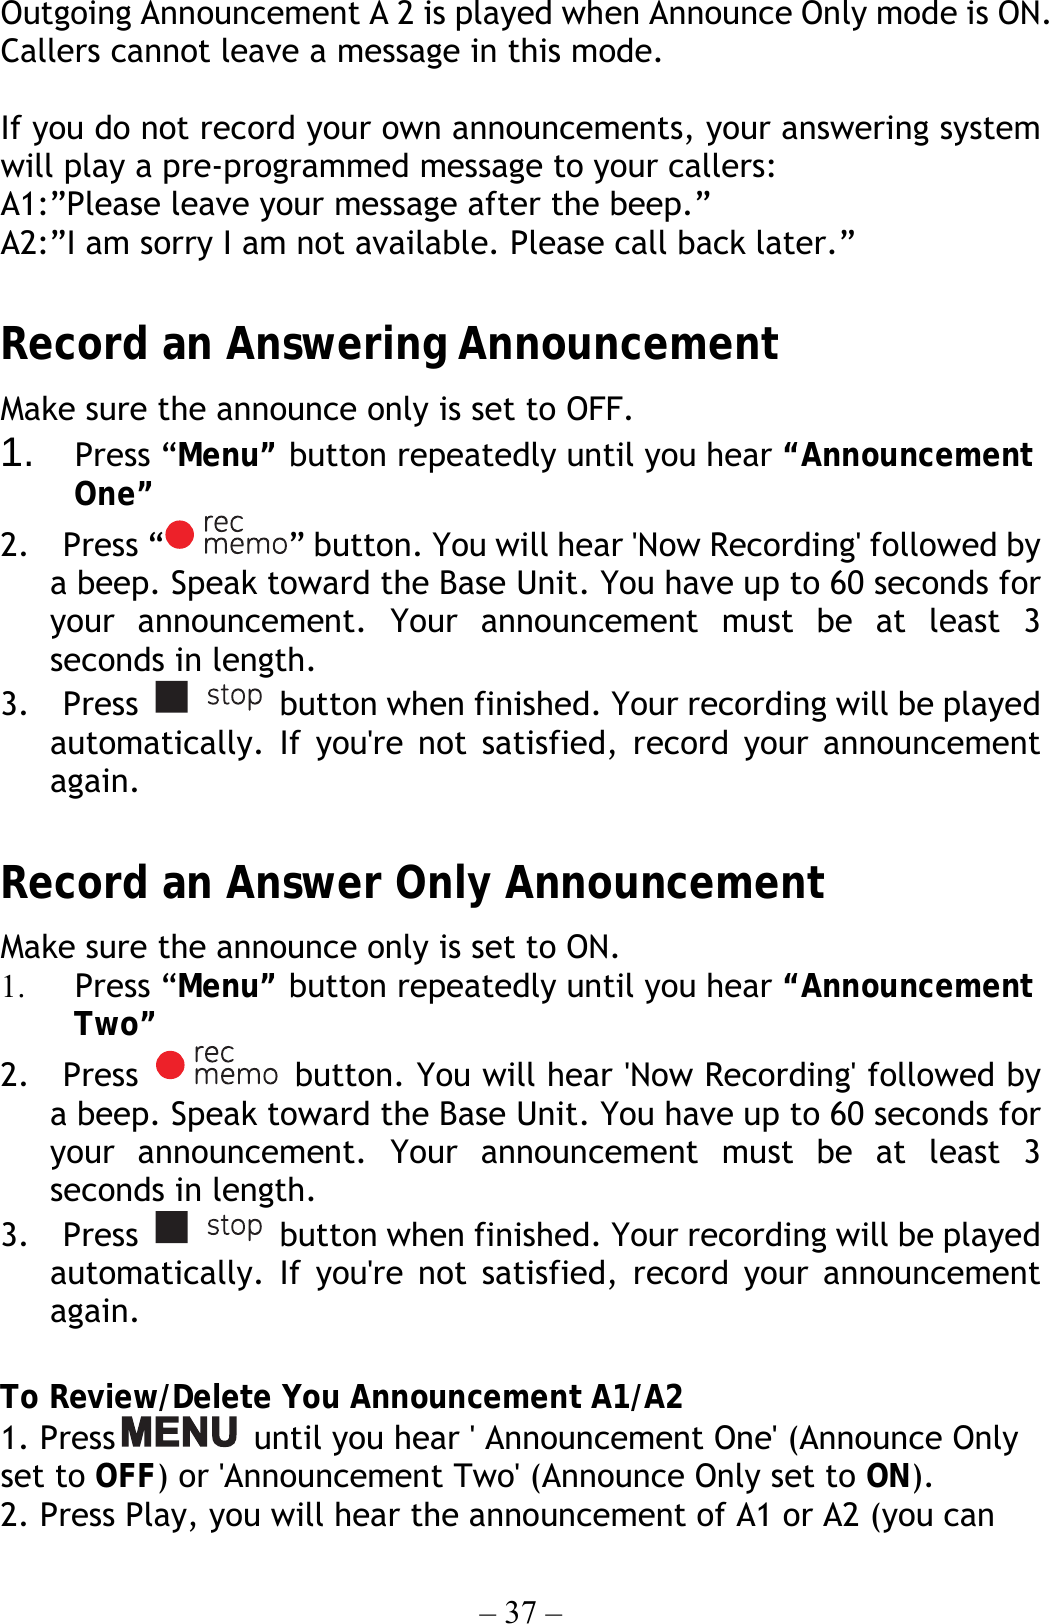 – 37 – Outgoing Announcement A 2 is played when Announce Only mode is ON. Callers cannot leave a message in this mode.  If you do not record your own announcements, your answering system will play a pre-programmed message to your callers: A1:”Please leave your message after the beep.” A2:”I am sorry I am not available. Please call back later.”  Record an Answering Announcement Make sure the announce only is set to OFF. 1.  Press “Menu” button repeatedly until you hear “Announcement One” 2.  Press “ ” button. You will hear &apos;Now Recording&apos; followed by a beep. Speak toward the Base Unit. You have up to 60 seconds for your announcement. Your announcement must be at least 3 seconds in length. 3.  Press    button when finished. Your recording will be played automatically. If you&apos;re not satisfied, record your announcement again.  Record an Answer Only Announcement Make sure the announce only is set to ON. 1.  Press “Menu” button repeatedly until you hear “Announcement Two” 2.  Press    button. You will hear &apos;Now Recording&apos; followed by a beep. Speak toward the Base Unit. You have up to 60 seconds for your announcement. Your announcement must be at least 3 seconds in length. 3.  Press    button when finished. Your recording will be played automatically. If you&apos;re not satisfied, record your announcement again.  To Review/Delete You Announcement A1/A2 1. Press   until you hear &apos; Announcement One&apos; (Announce Only set to OFF) or &apos;Announcement Two&apos; (Announce Only set to ON). 2. Press Play, you will hear the announcement of A1 or A2 (you can 